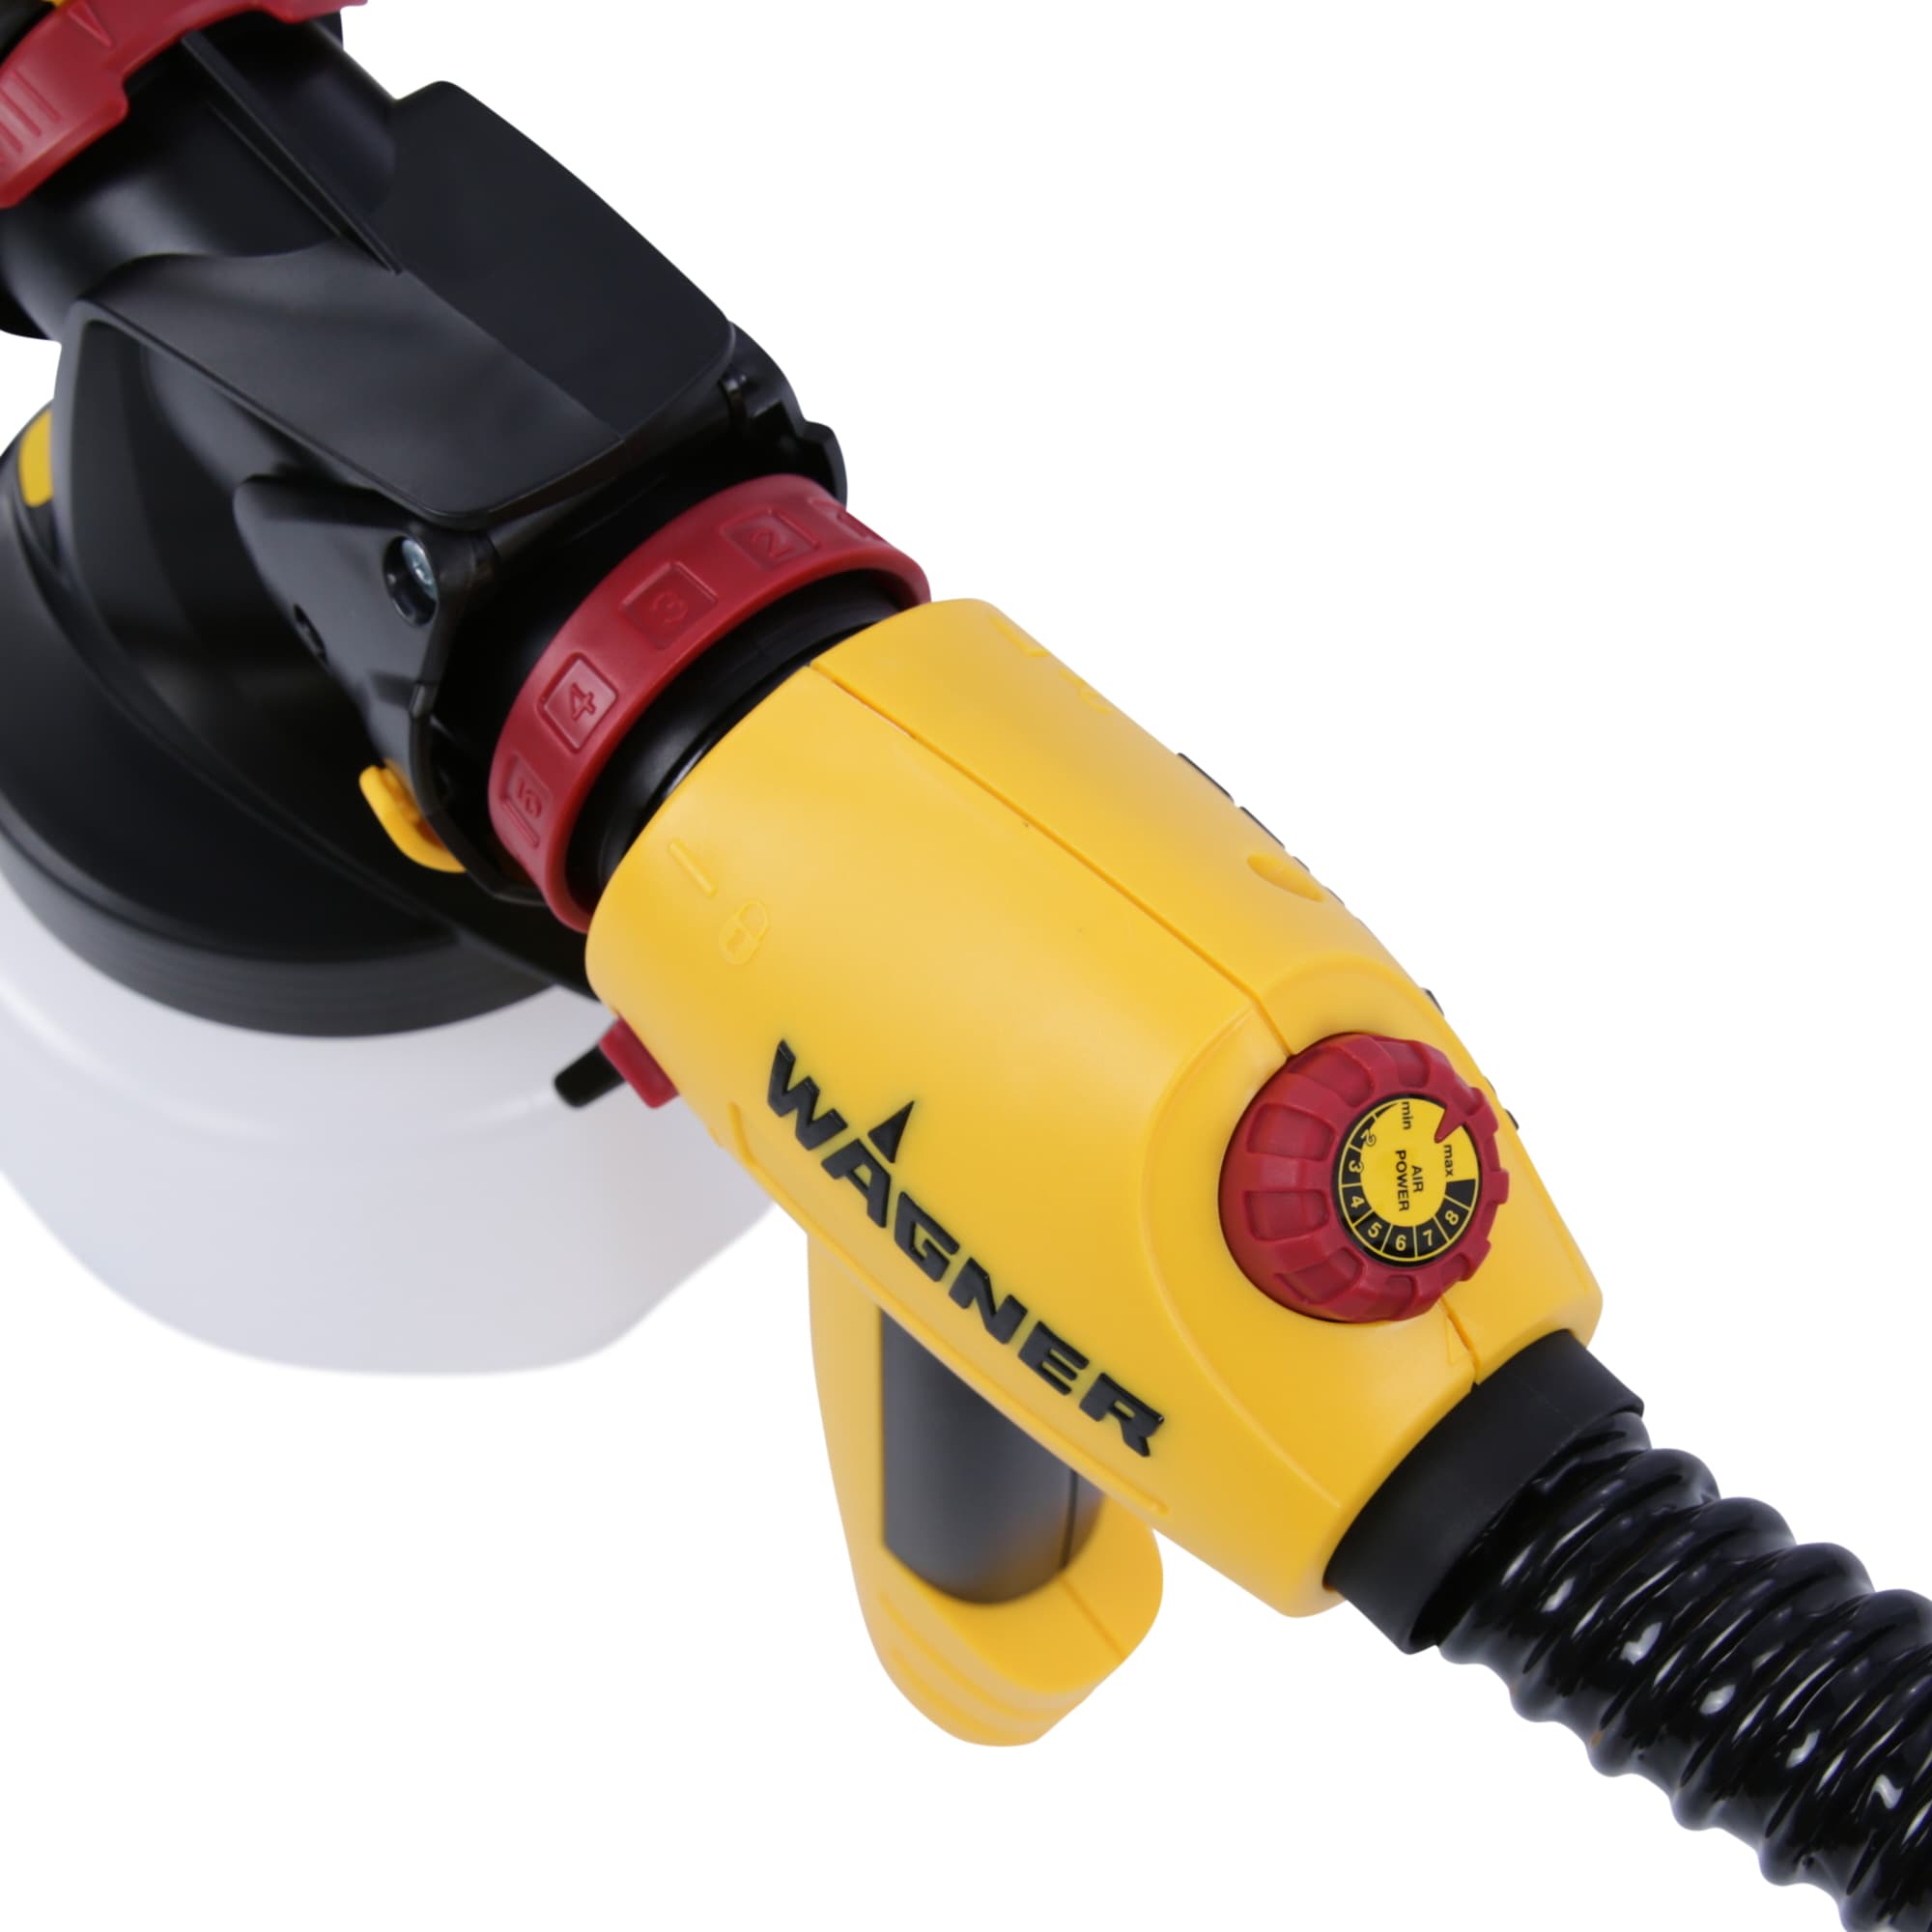 FLEX 0529091 er FLEXiO 5000 Corded Electric Stationary HVLP Paint Sprayer (Compatible with Stains) - 1